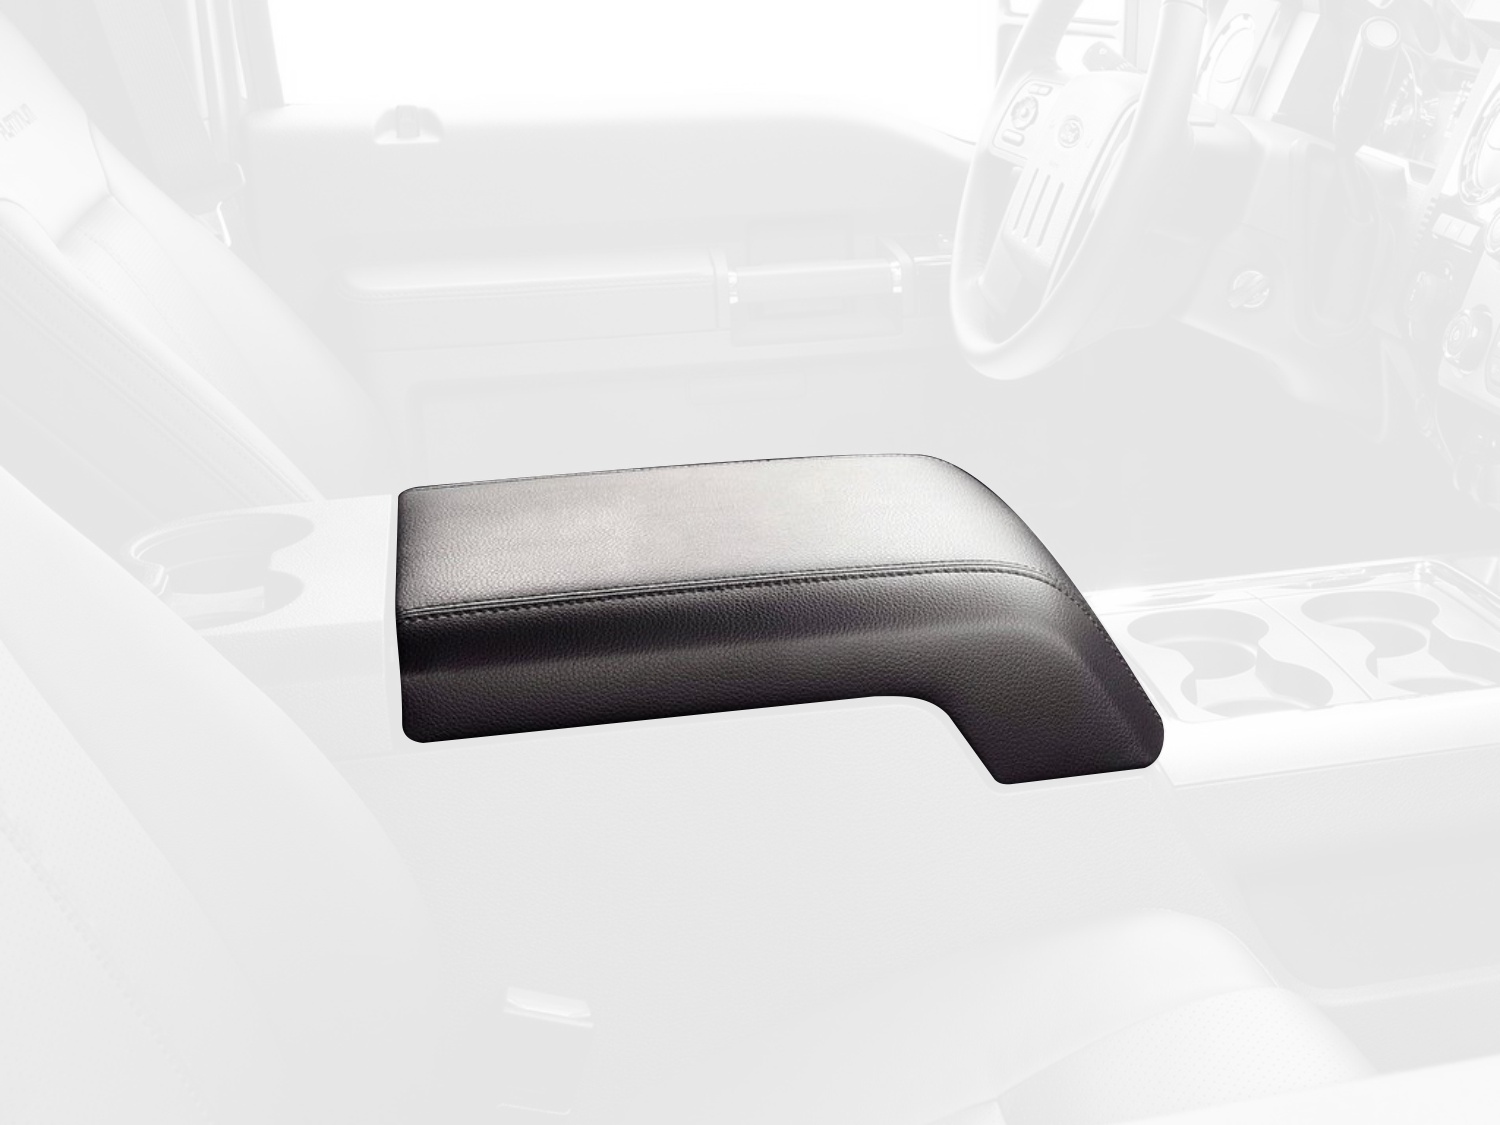 2008-16 Ford F-250 / F-350 armrest cover (2011-16)